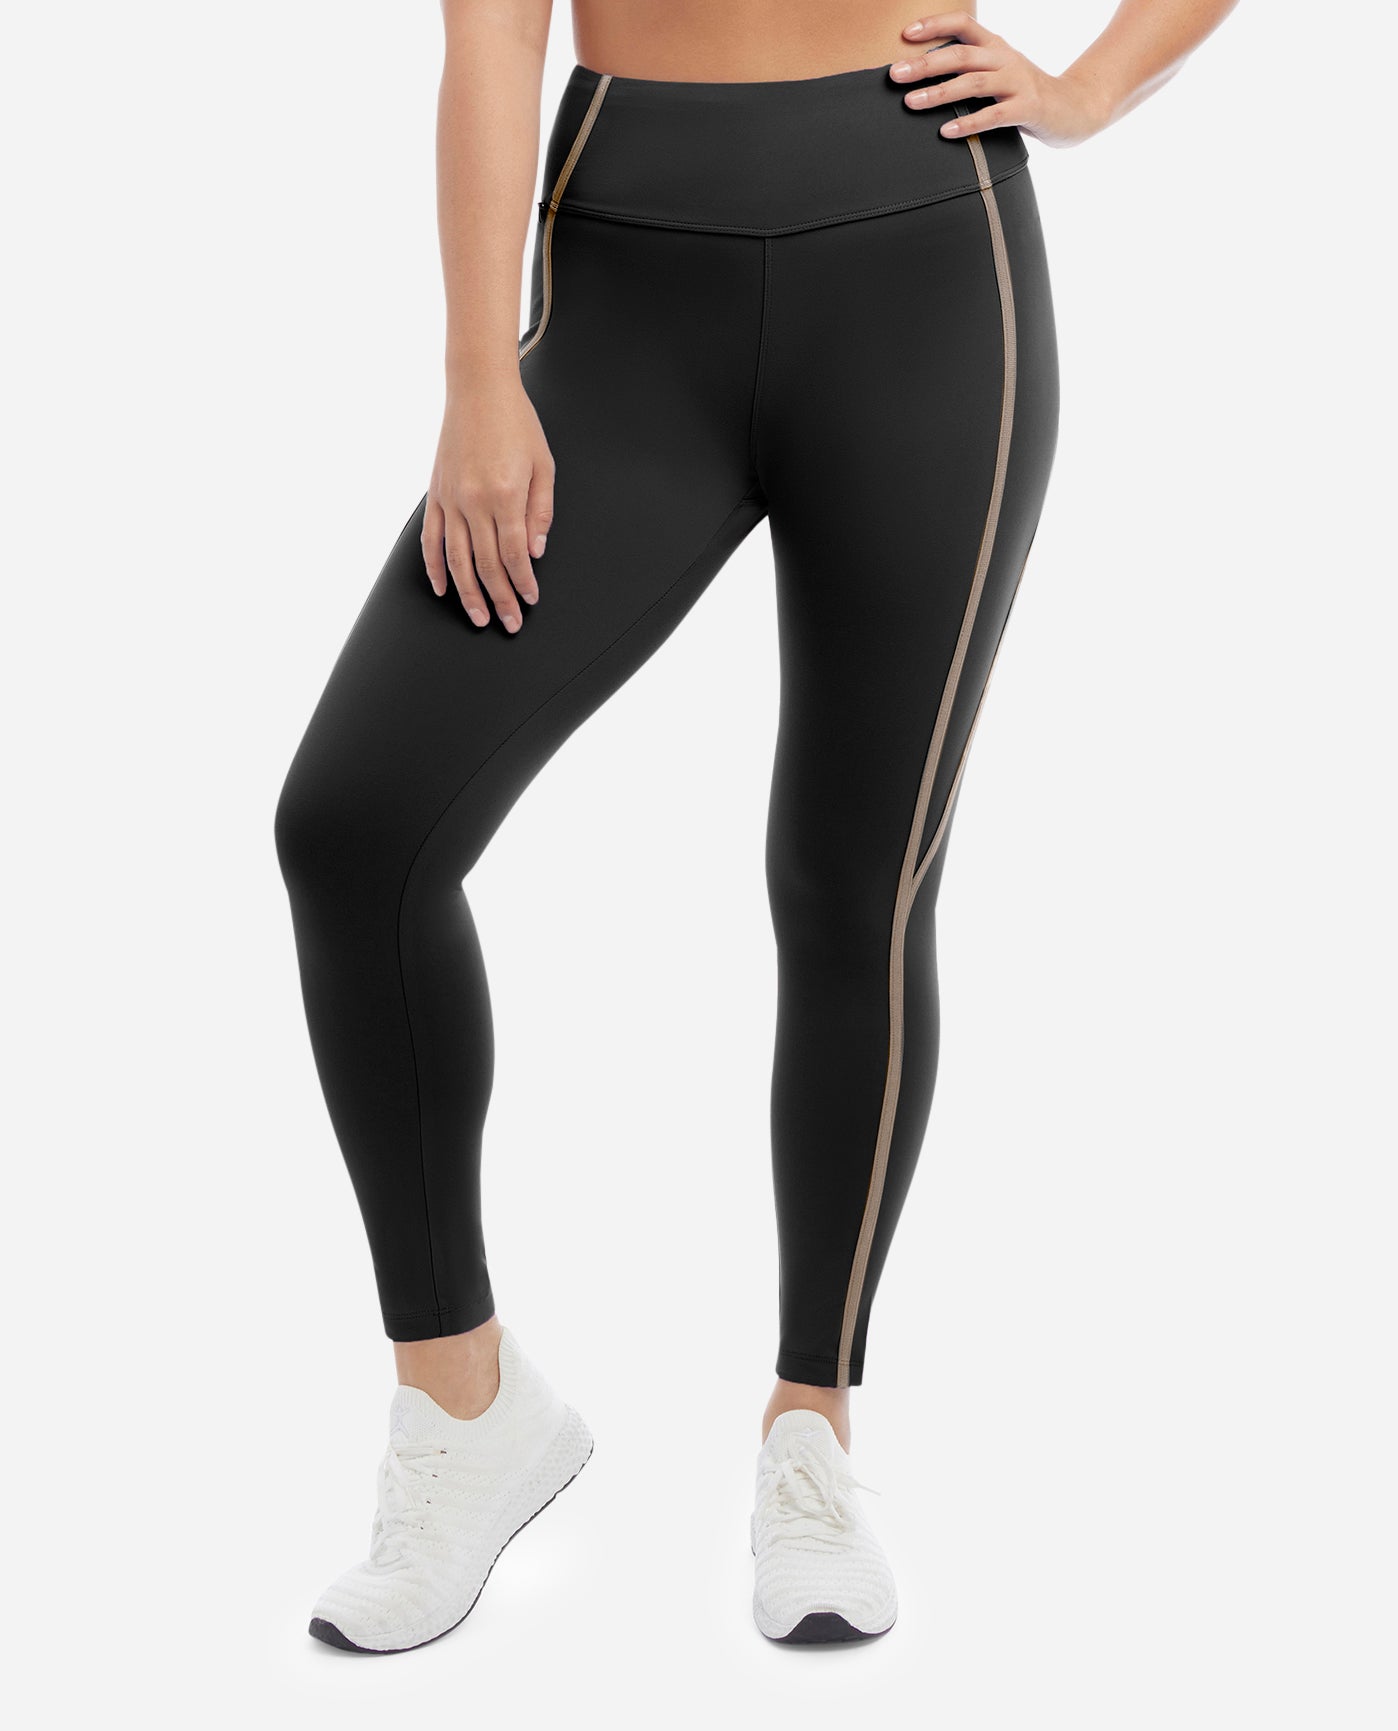 Danskin Ladies' Active Tight with Pockets (Black, Large) 